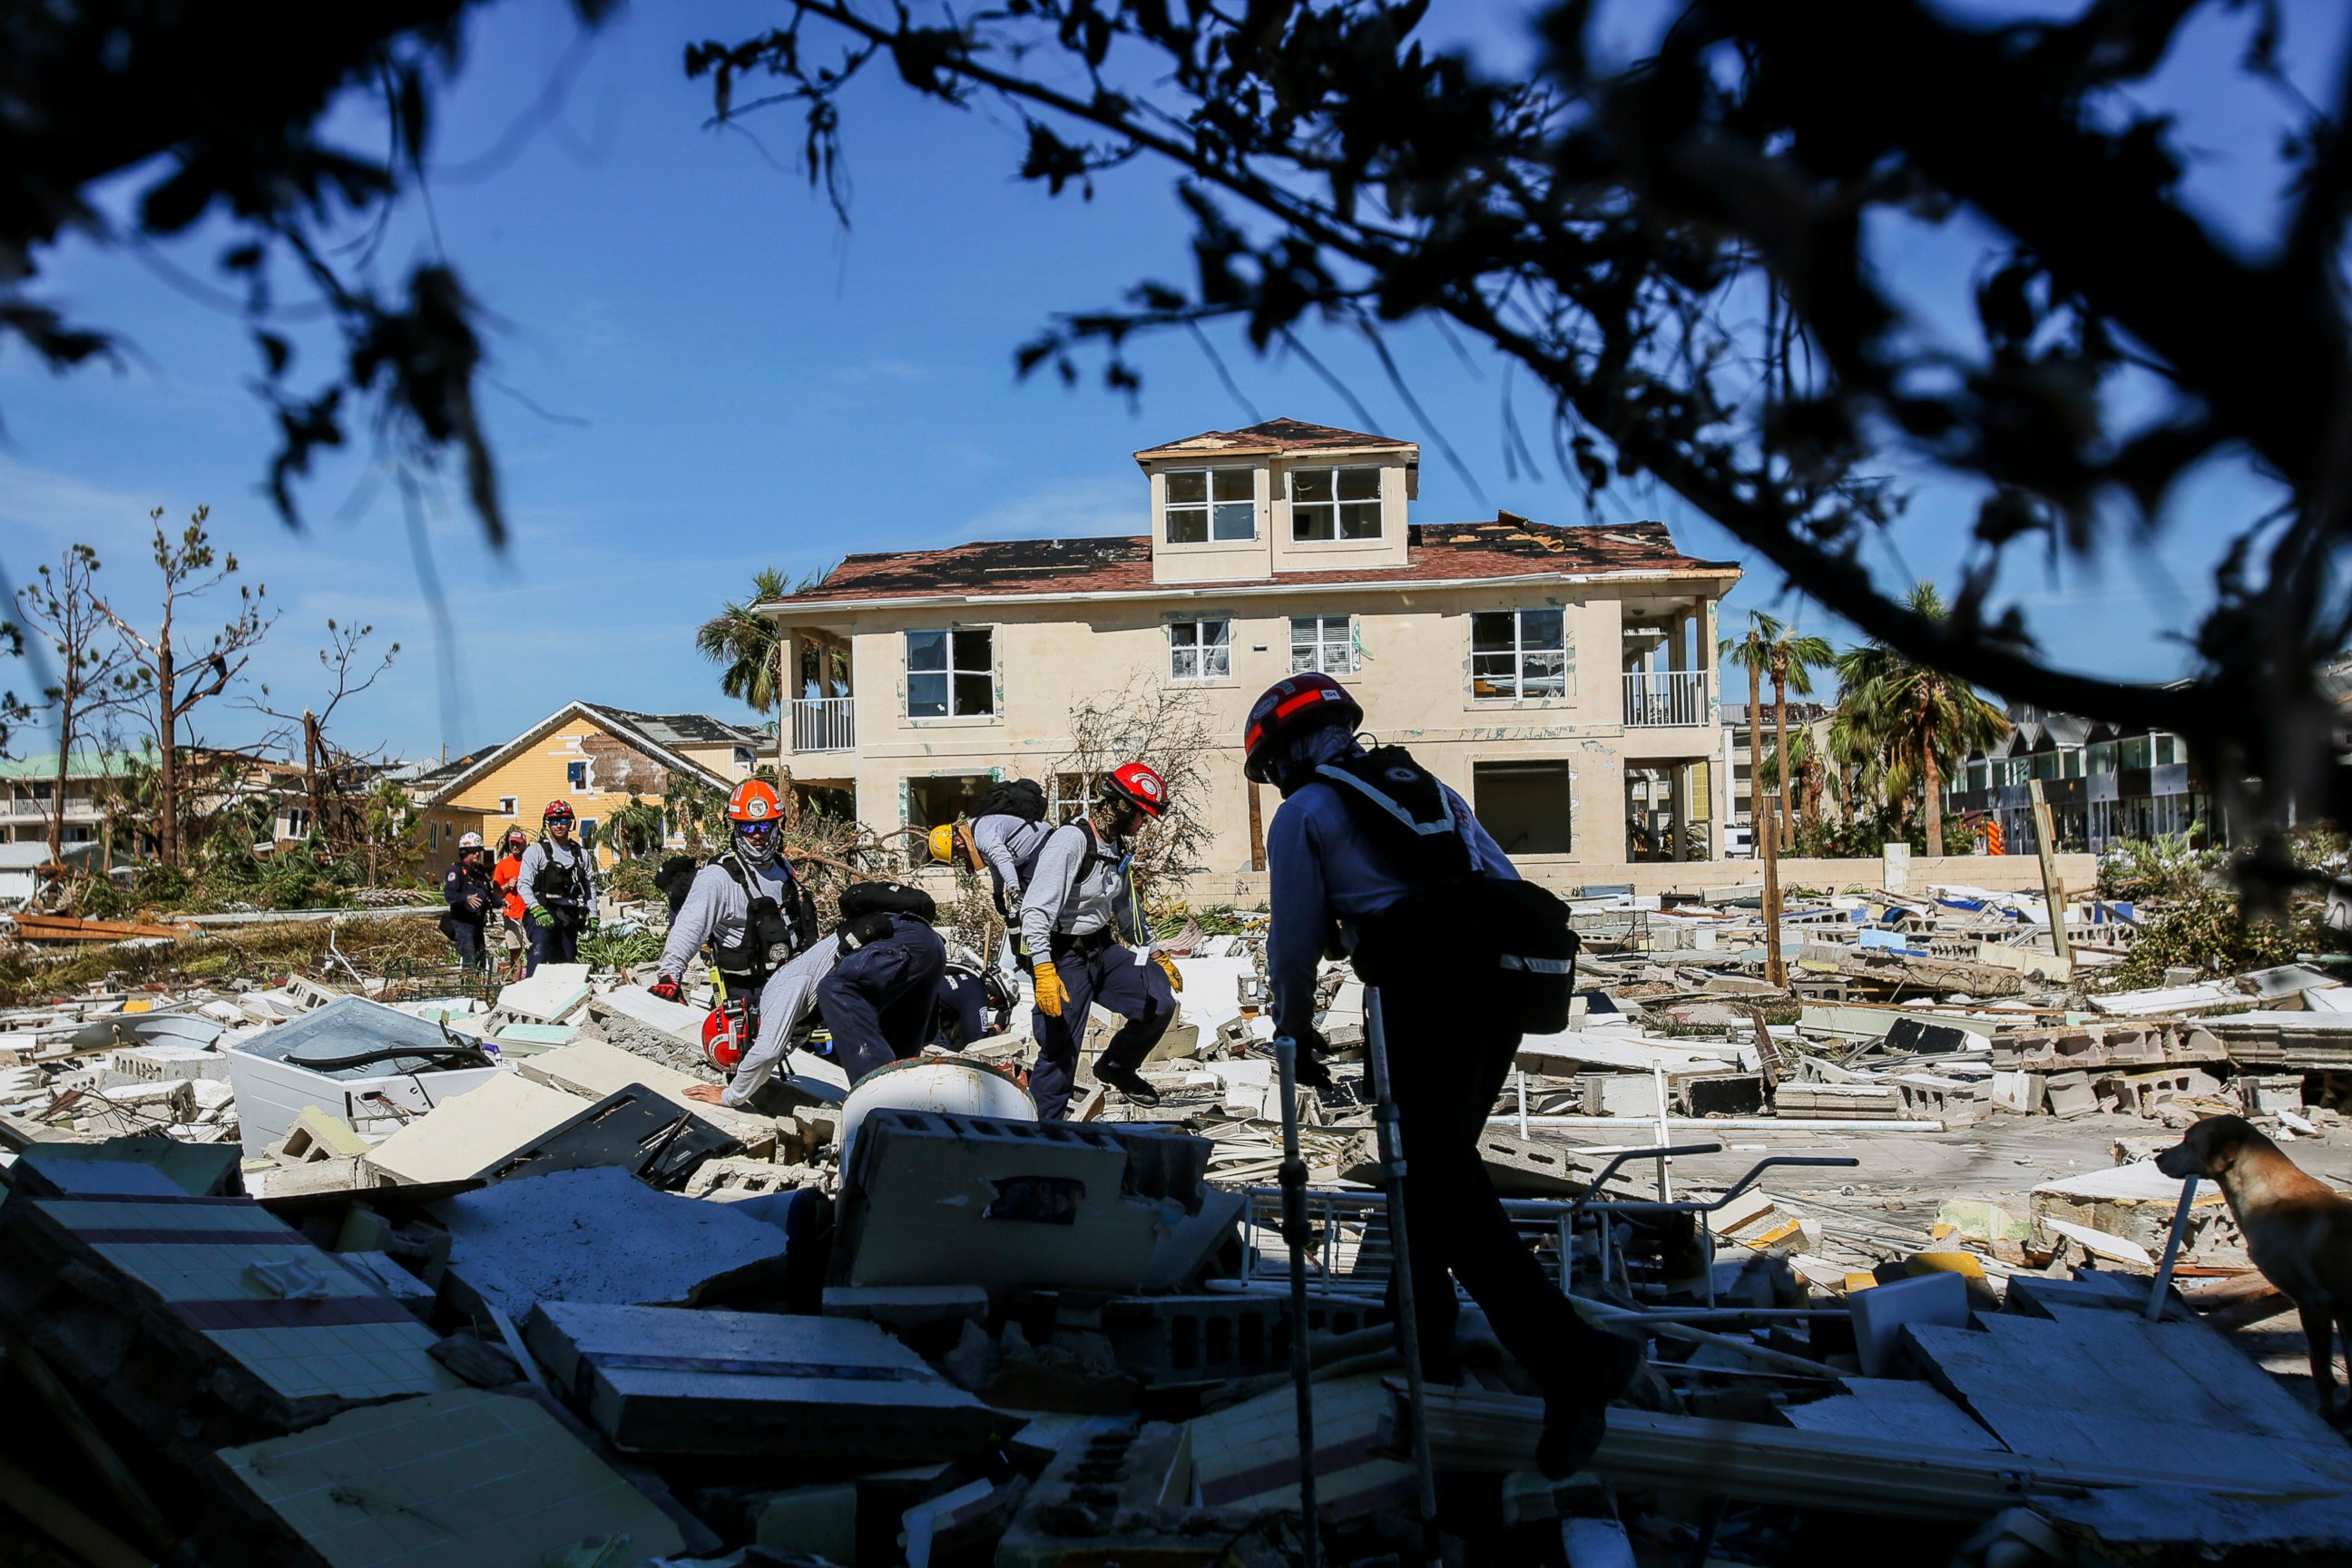 PHOTO: Members from South Florida Task Force search a flattened home destroyed by Hurricane Michael in Mexico Beach, Fla., Friday, Oct. 12, 2018, after Hurricane Michael went through the area on Wednesday.